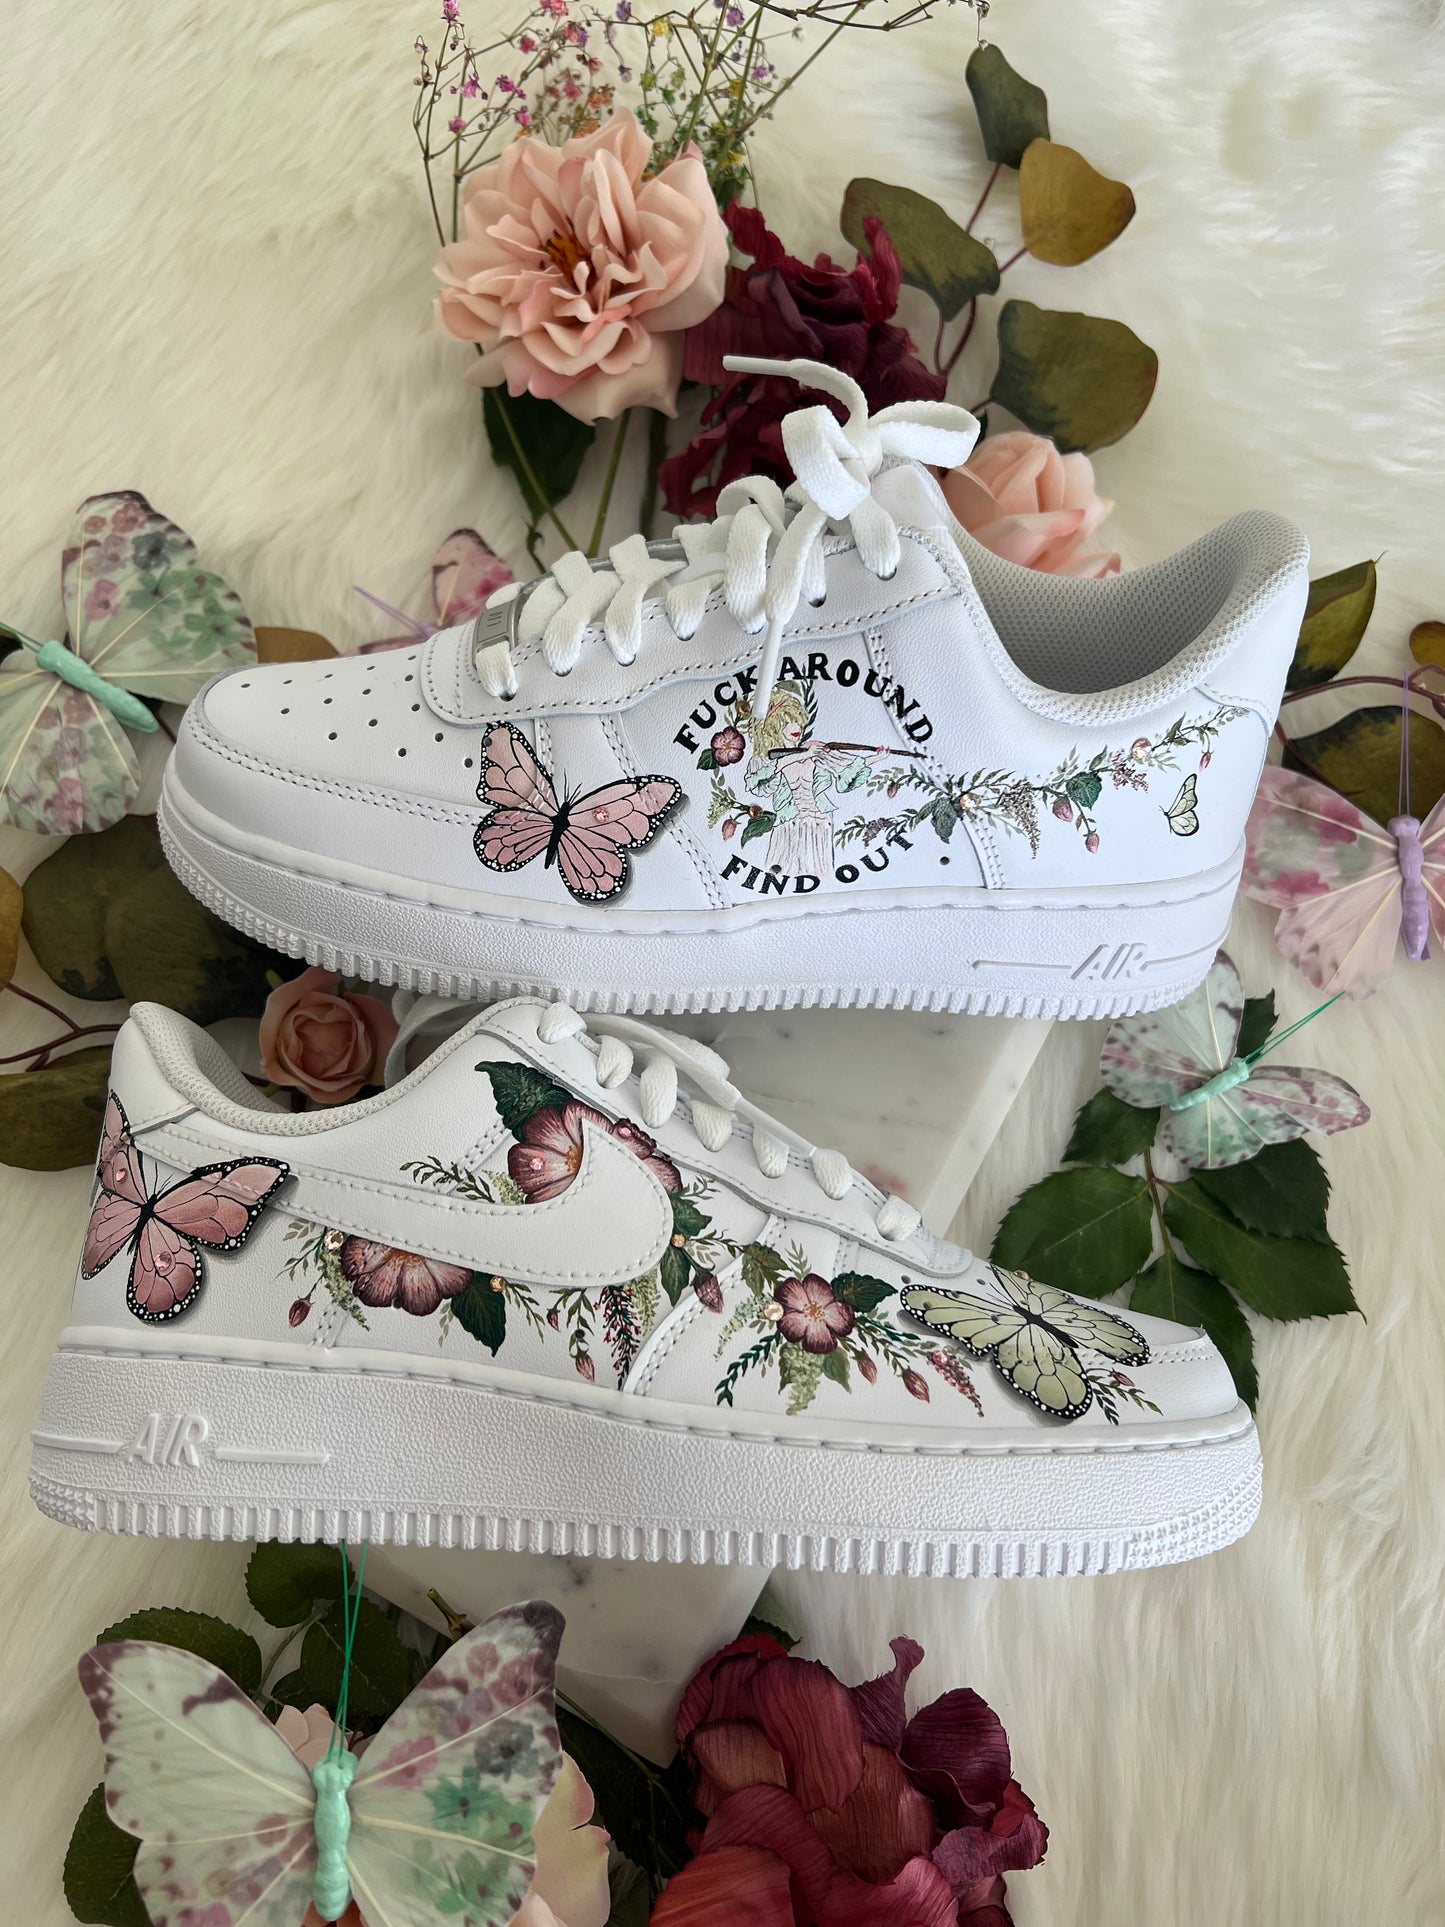 Dolly Parton Hand Painted Sneakers